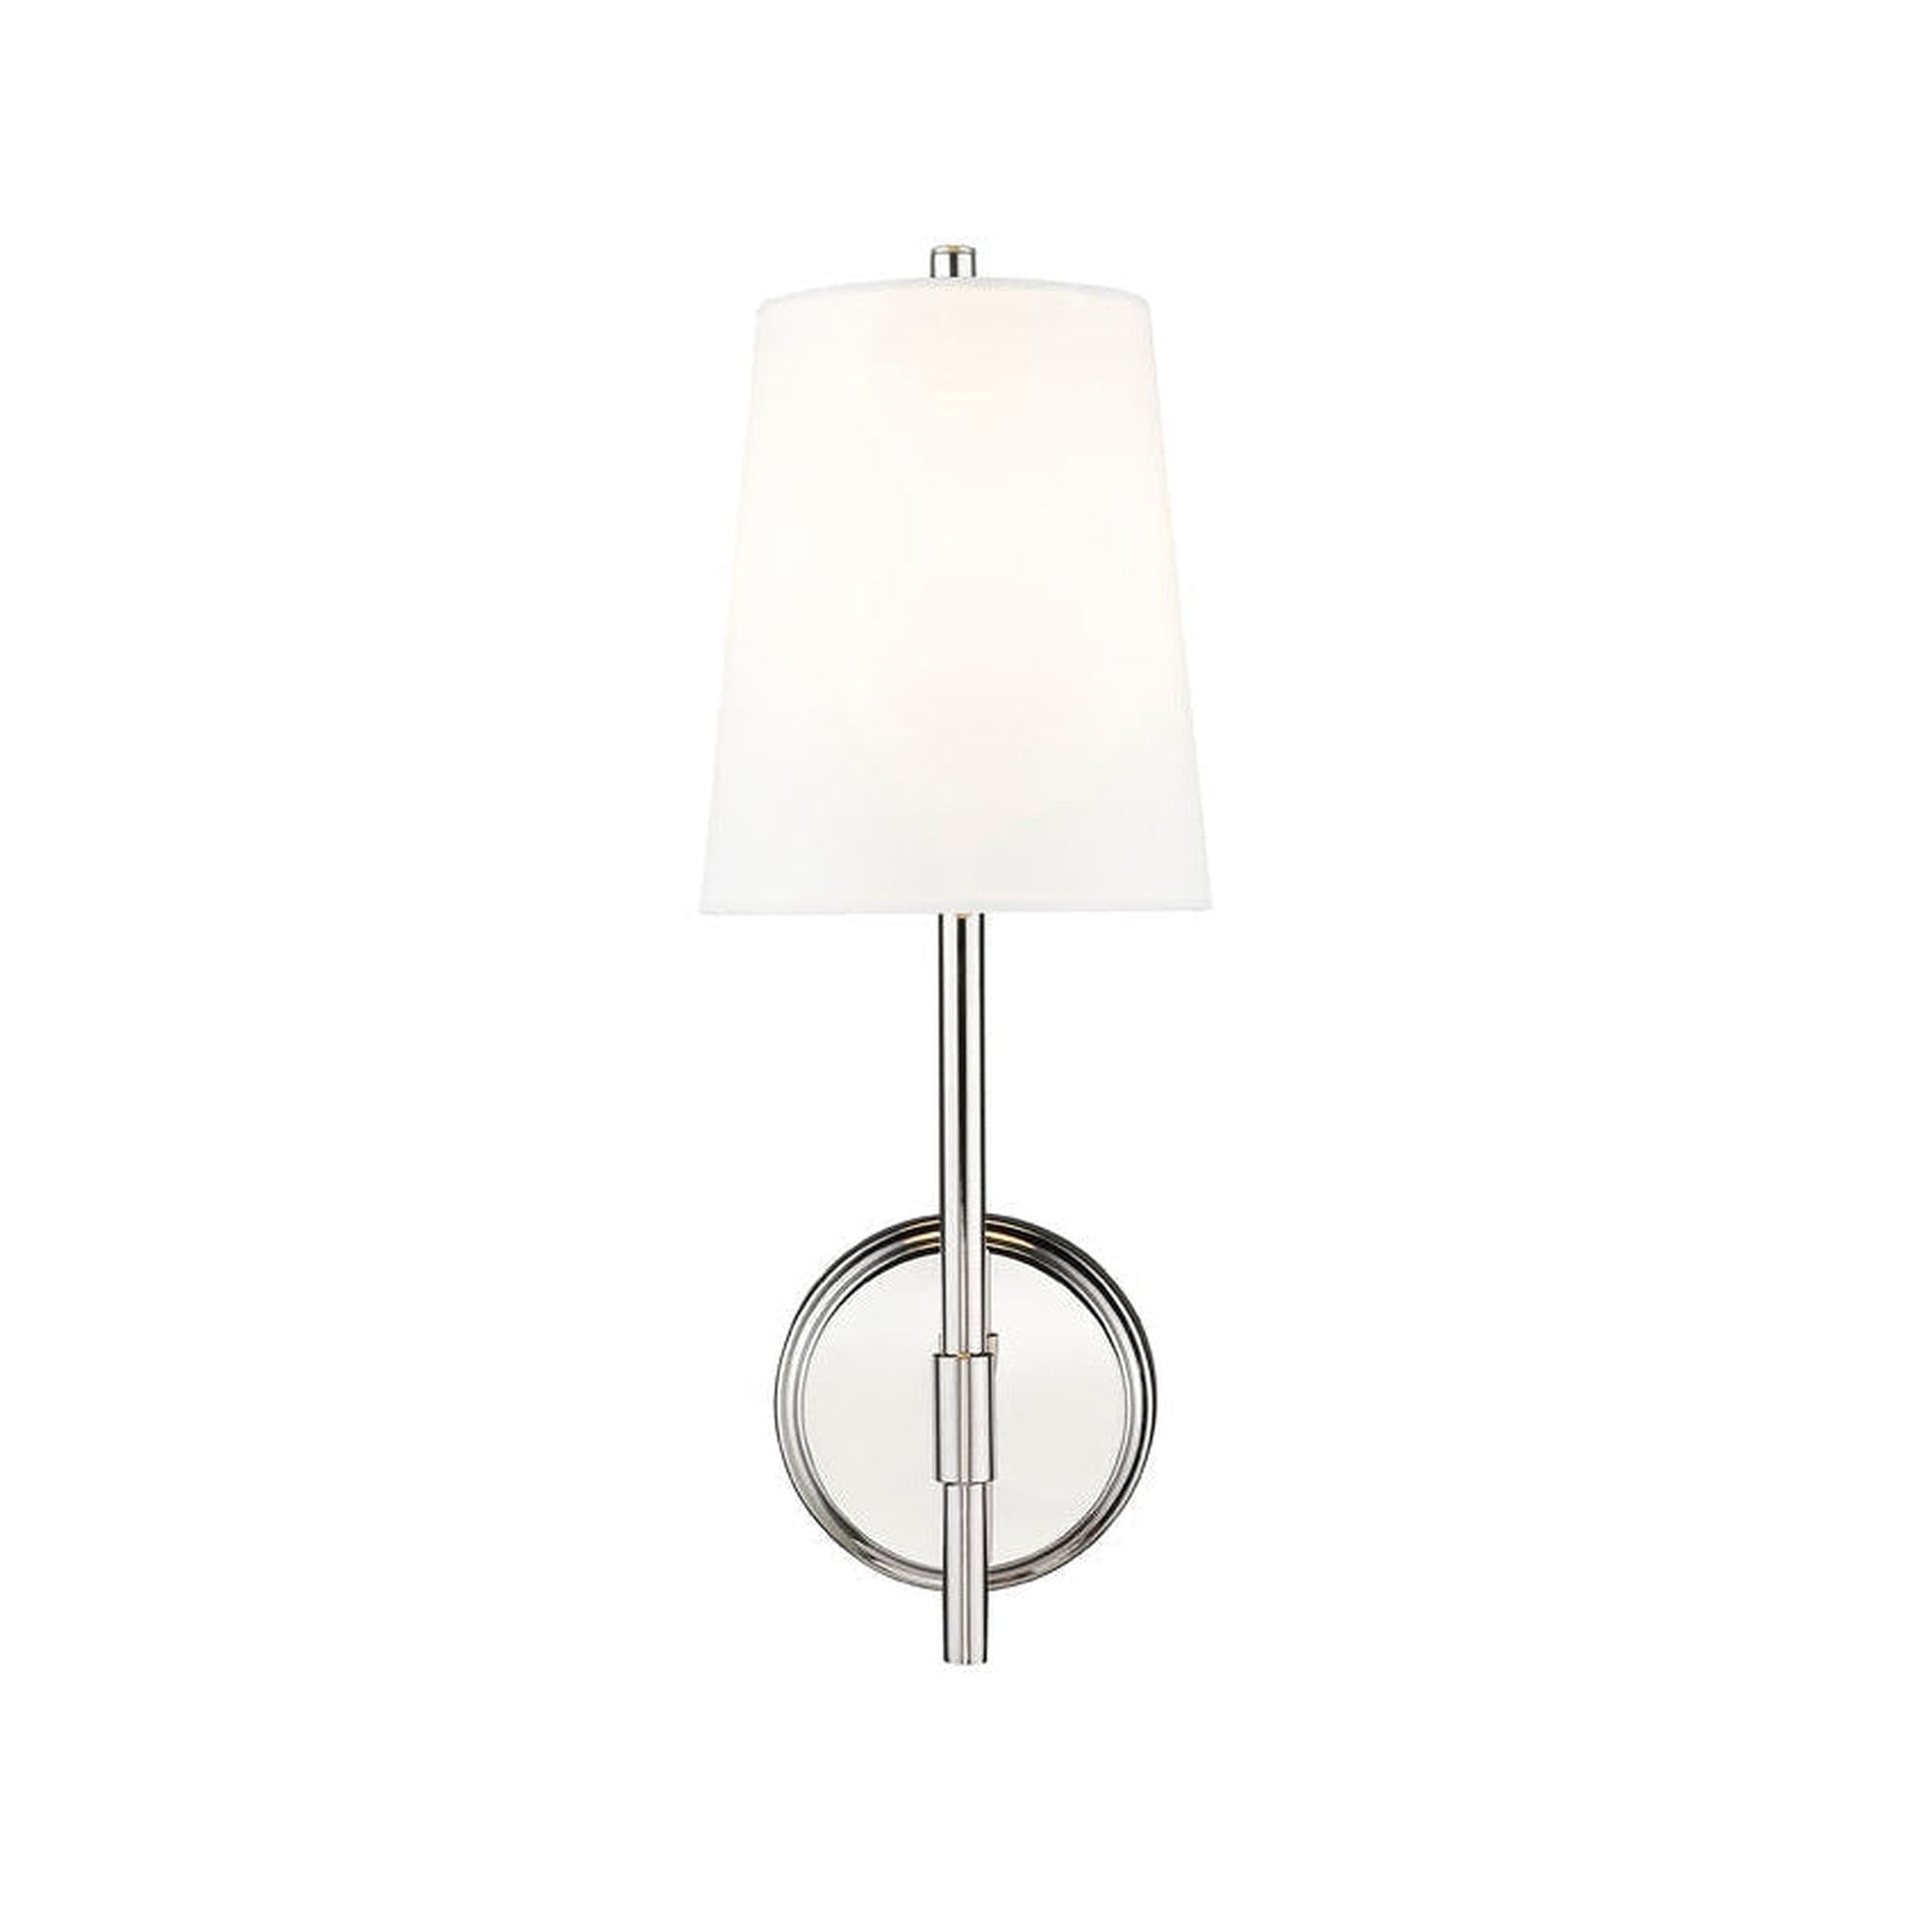 Z-Lite Winward 6" 1-Light Polished Nickel Wall Sconce With White Fabric Shade